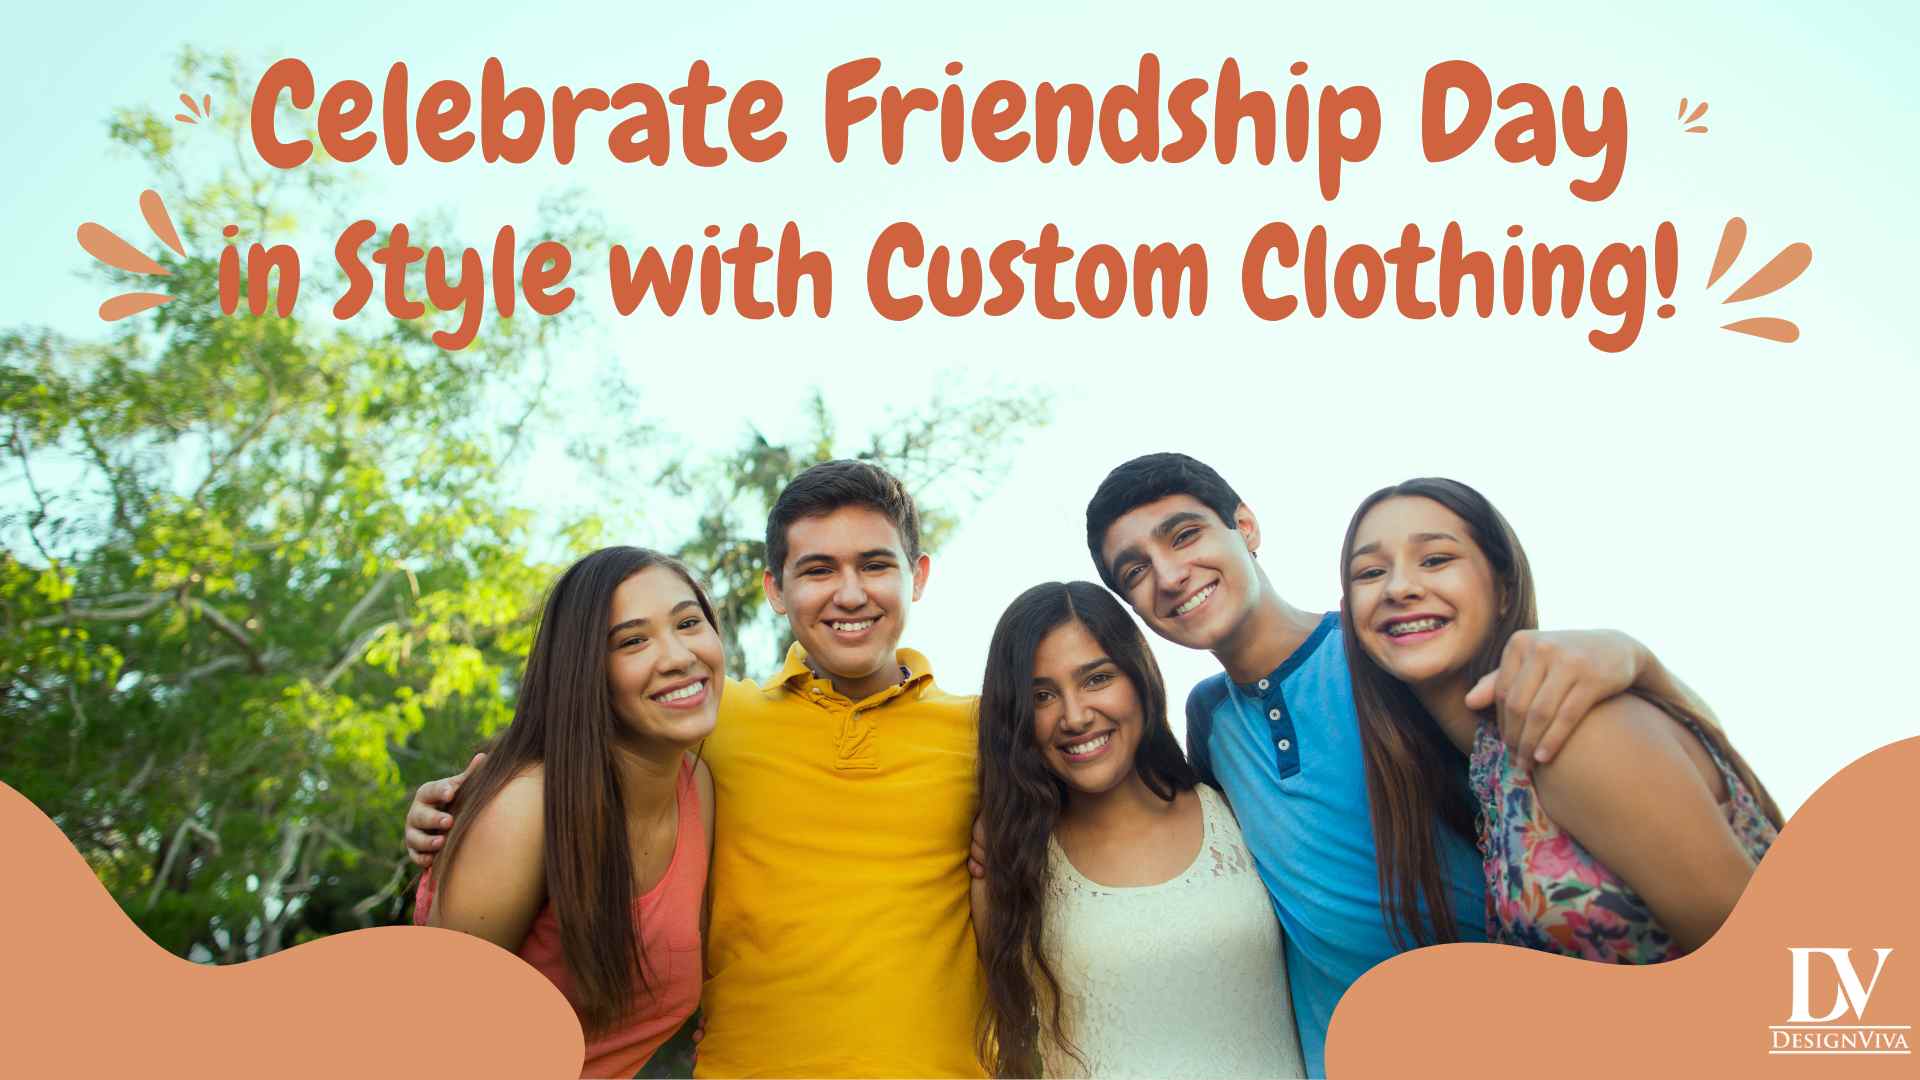 Celebrate Friendship Day in Style with Custom Clothing!